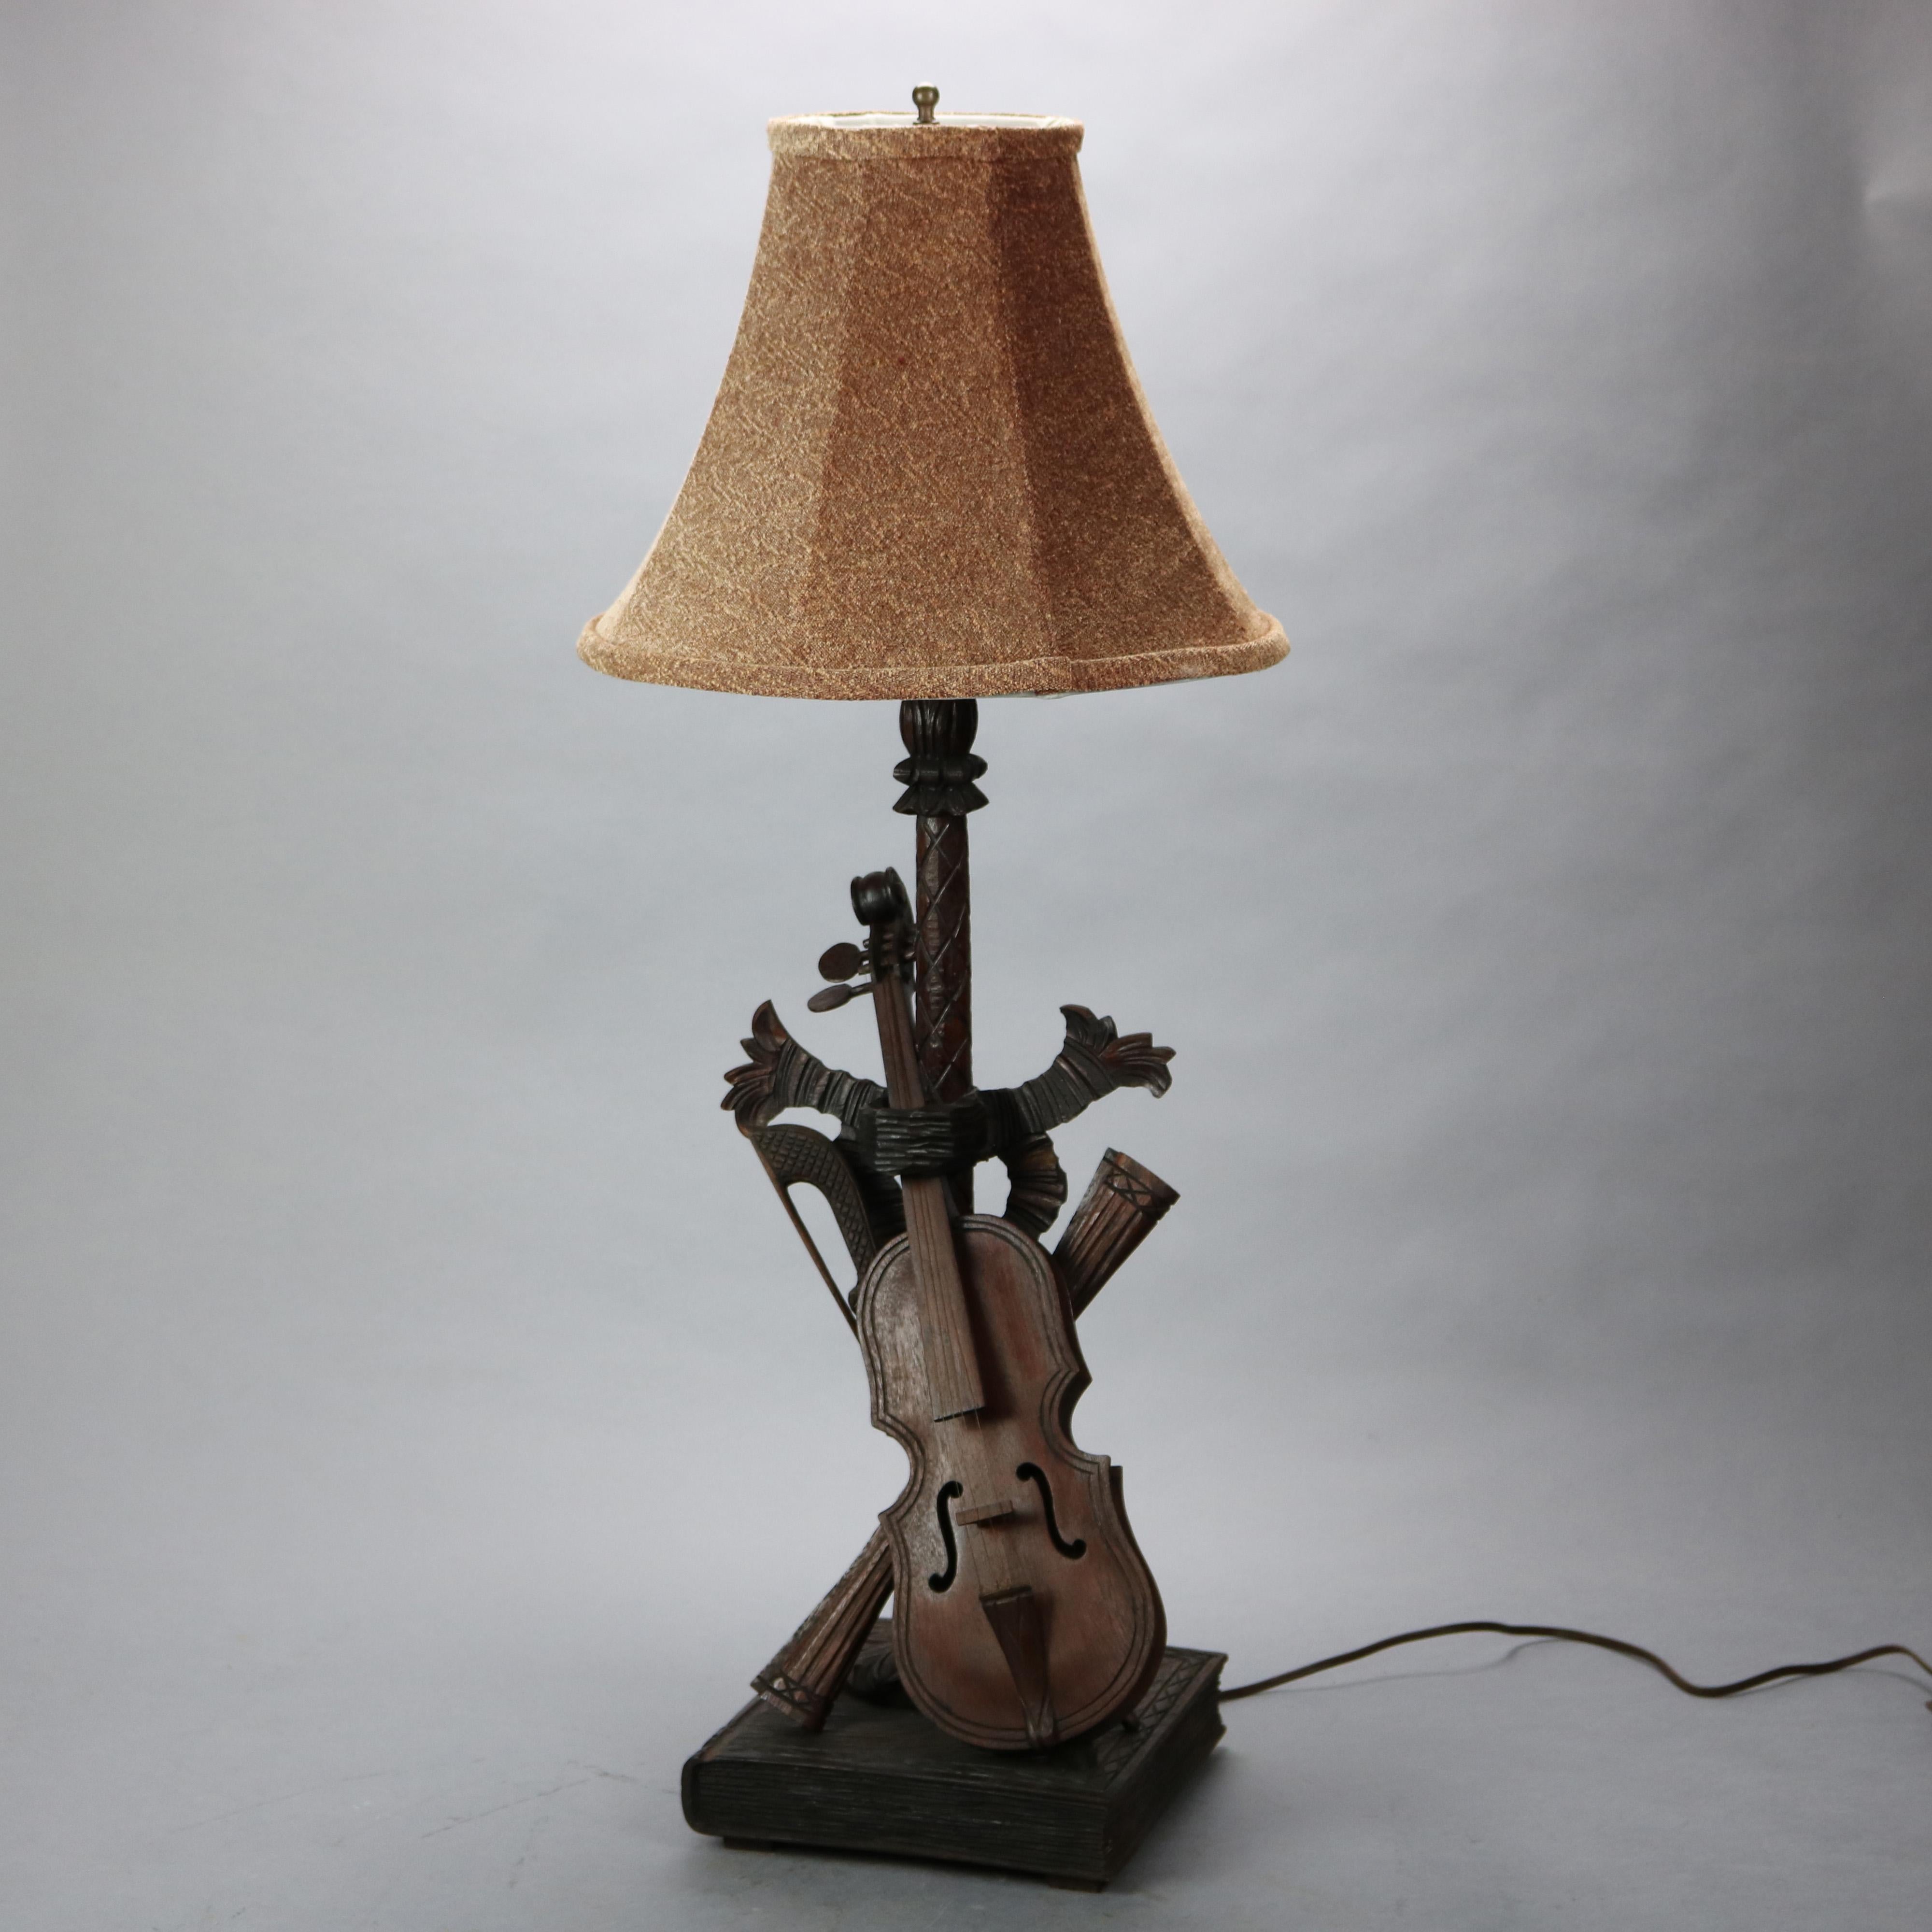 Antique German Black Forest table lamp offers carved sculptural base with music instrument grouping to include violin, bow and book, wired for US electrical use, c1880

Measures - overall 34.25''h x 14''w x 14''d; shade 14'' diameter; base 9'' x